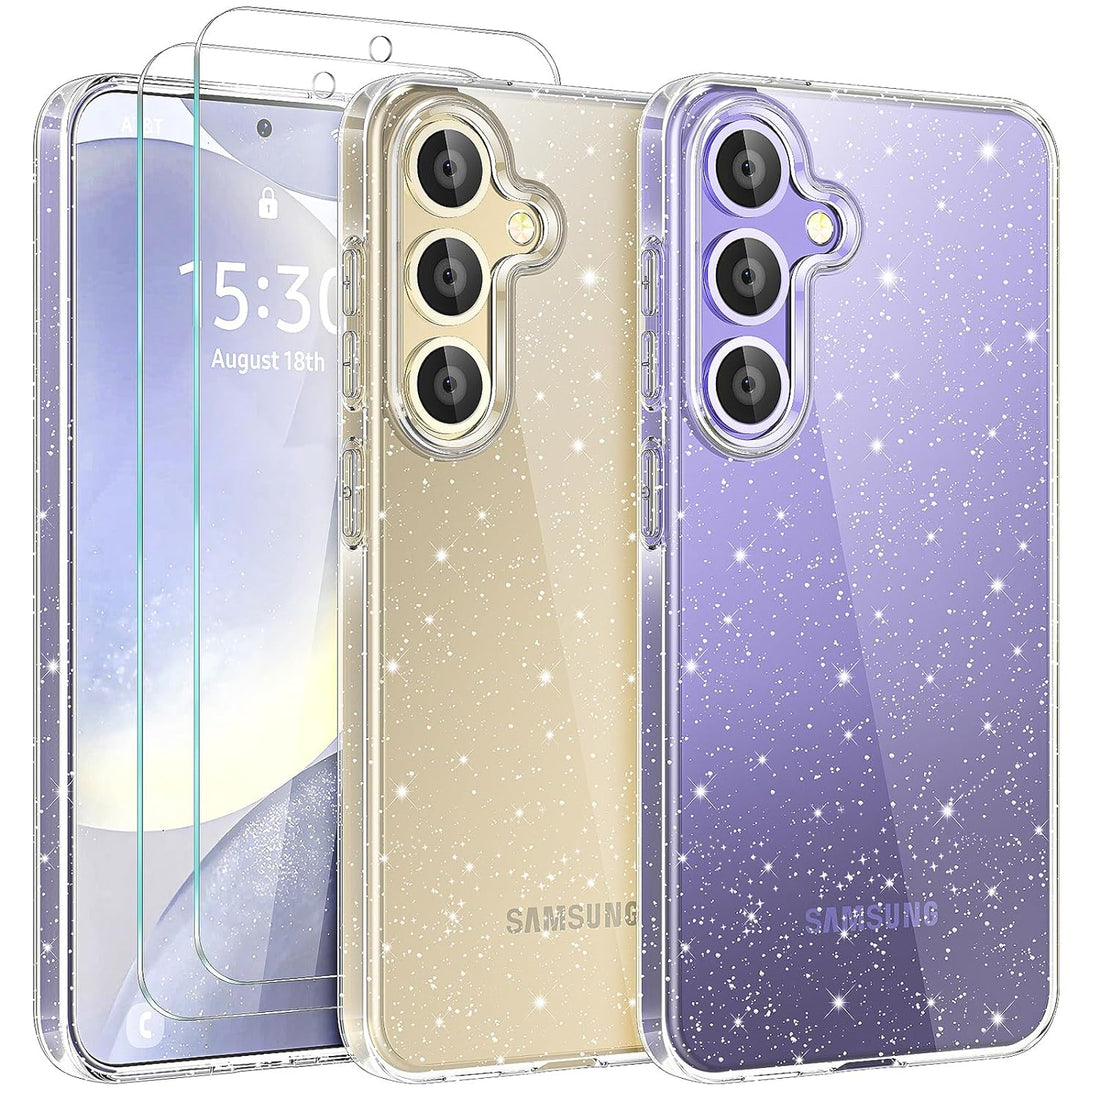 KSWOUS Glitter Case for Samsung Galaxy S24 5G, with Screen Protector [2 Pack], Cute Clear Bling Sparkle Protective Slim Soft Shockproof Cover Women Girls Phone Case for Samsung Galaxy S24